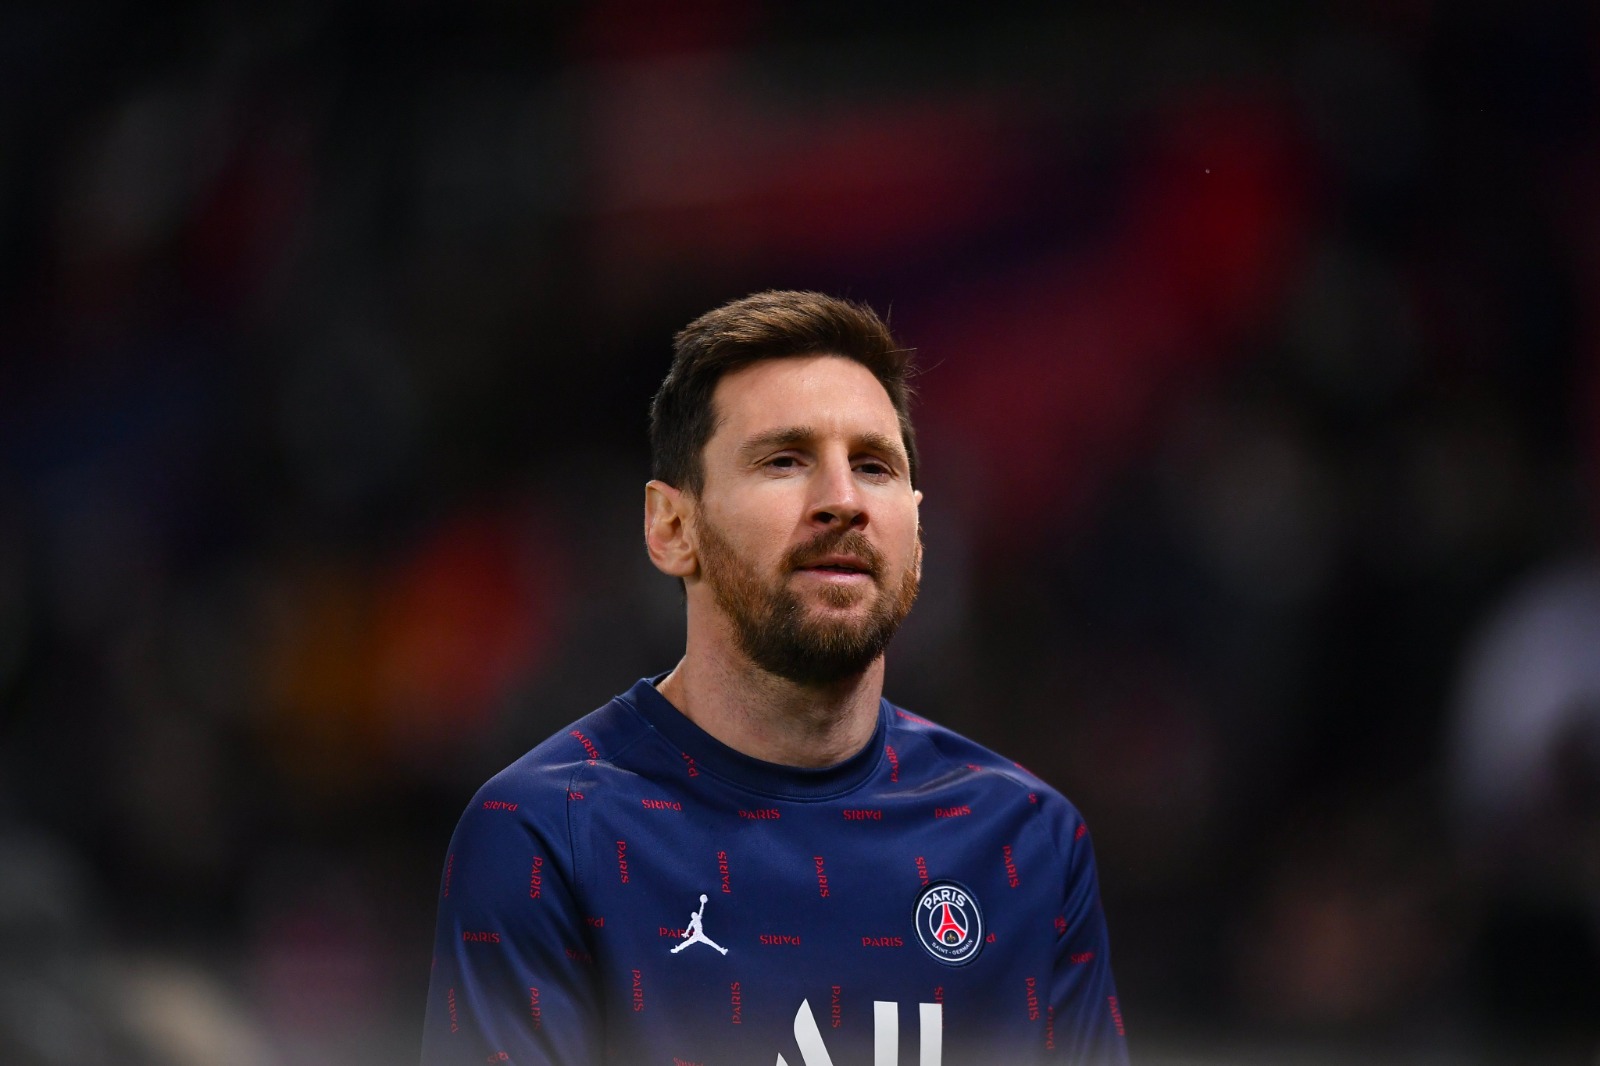 Lionel Messi is the player I worked best with and would be nice if he came back, proclaims Jordi Alba